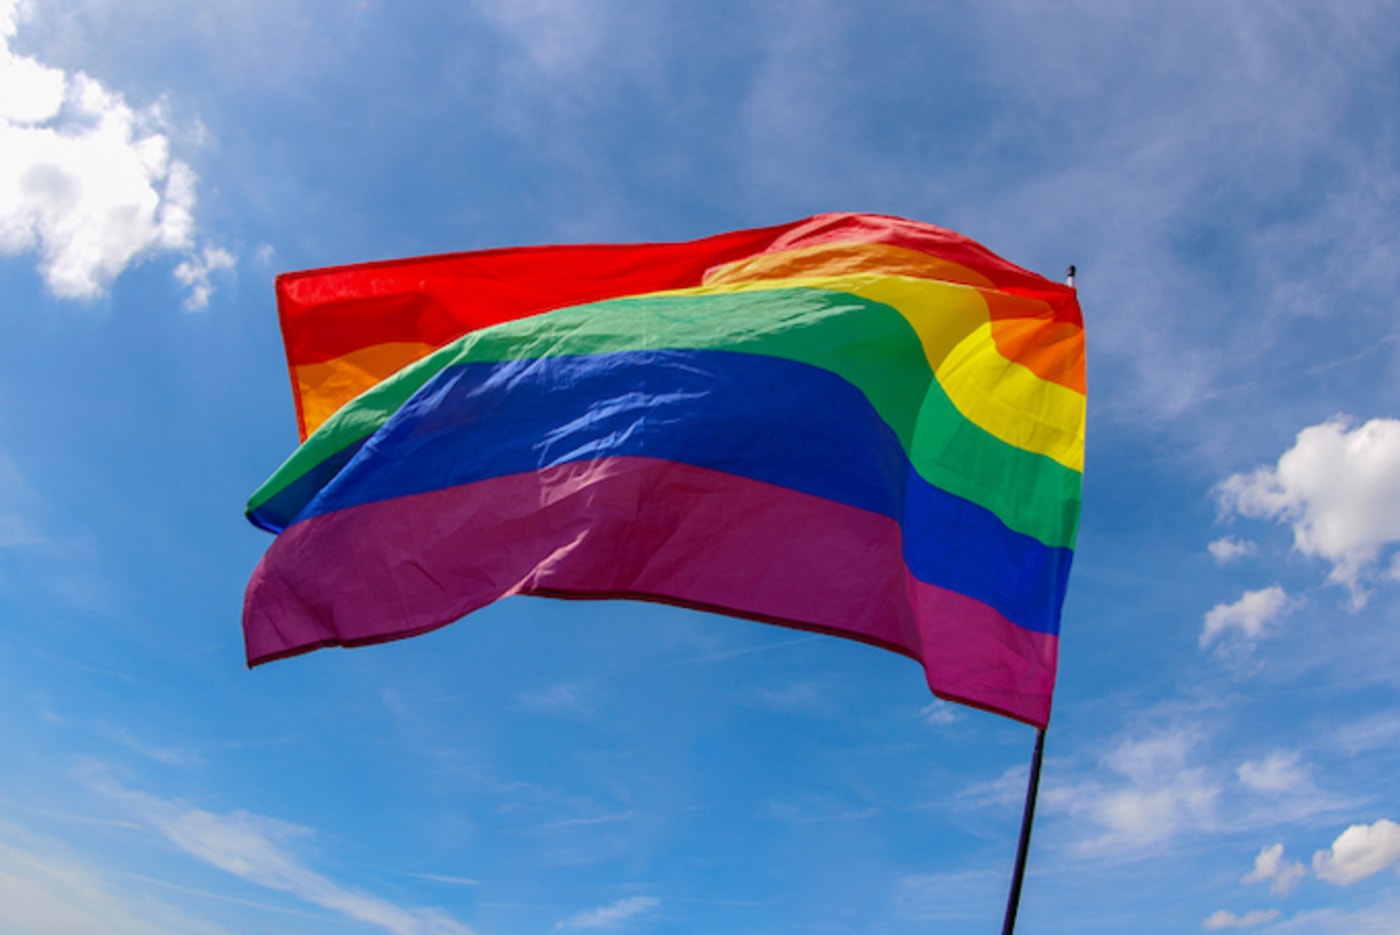 This is a picture of an LGBT flag.